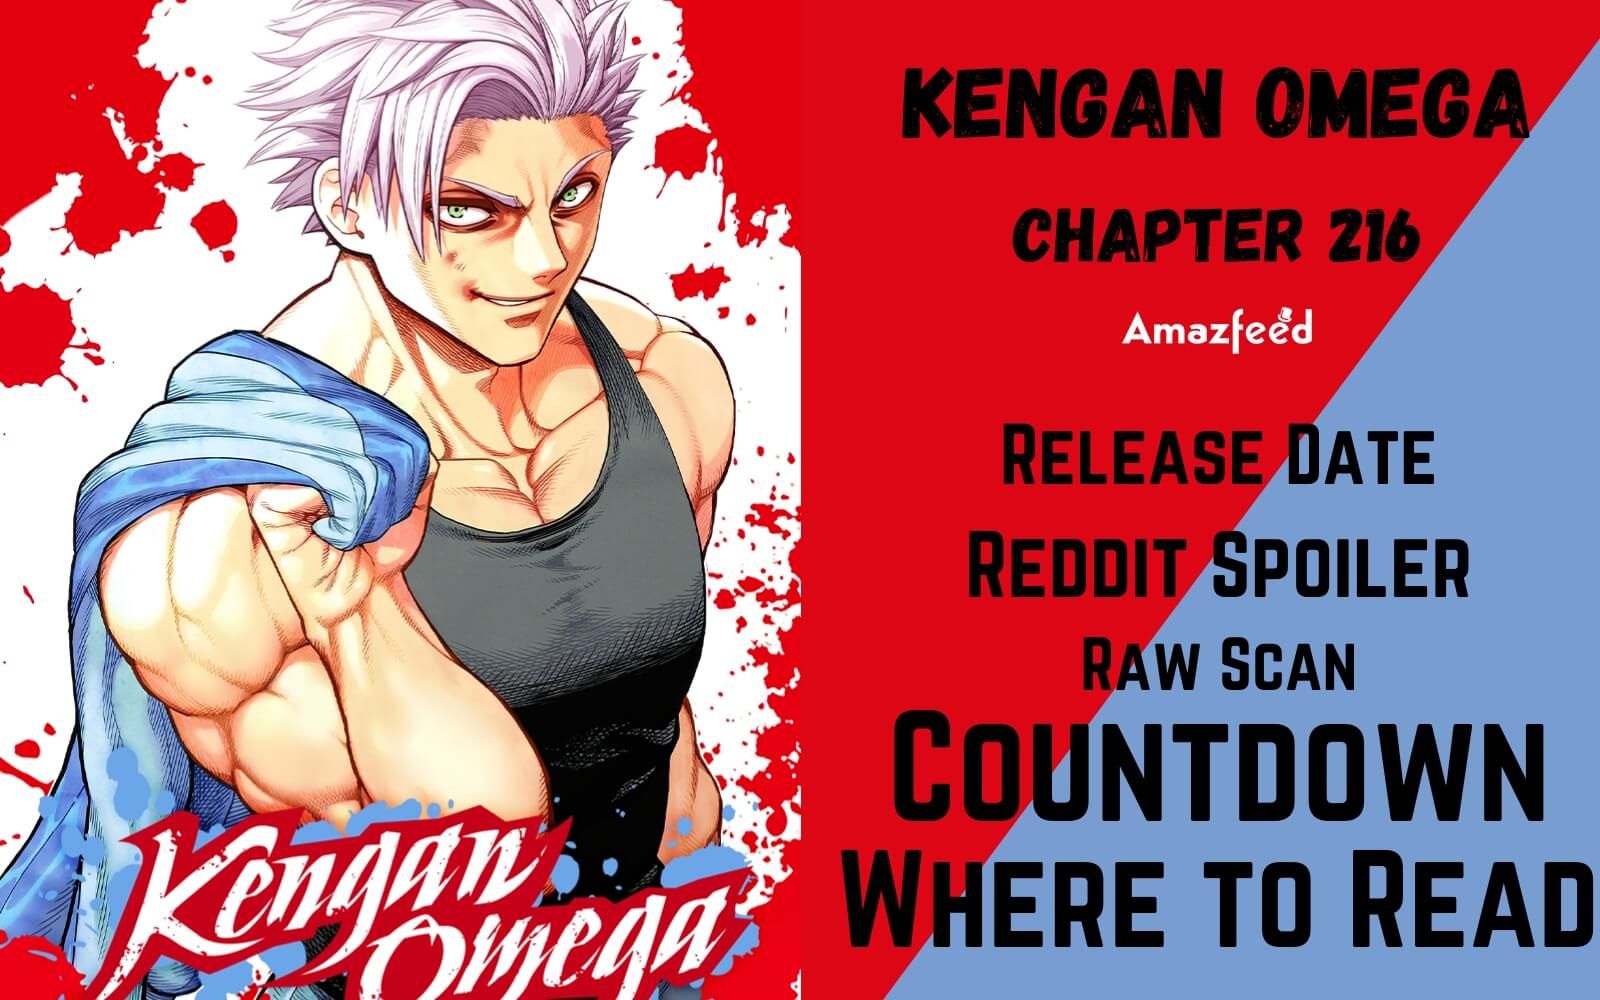 Kengan Omega Chapter 215 Release Date: When Is It Coming? in 2023